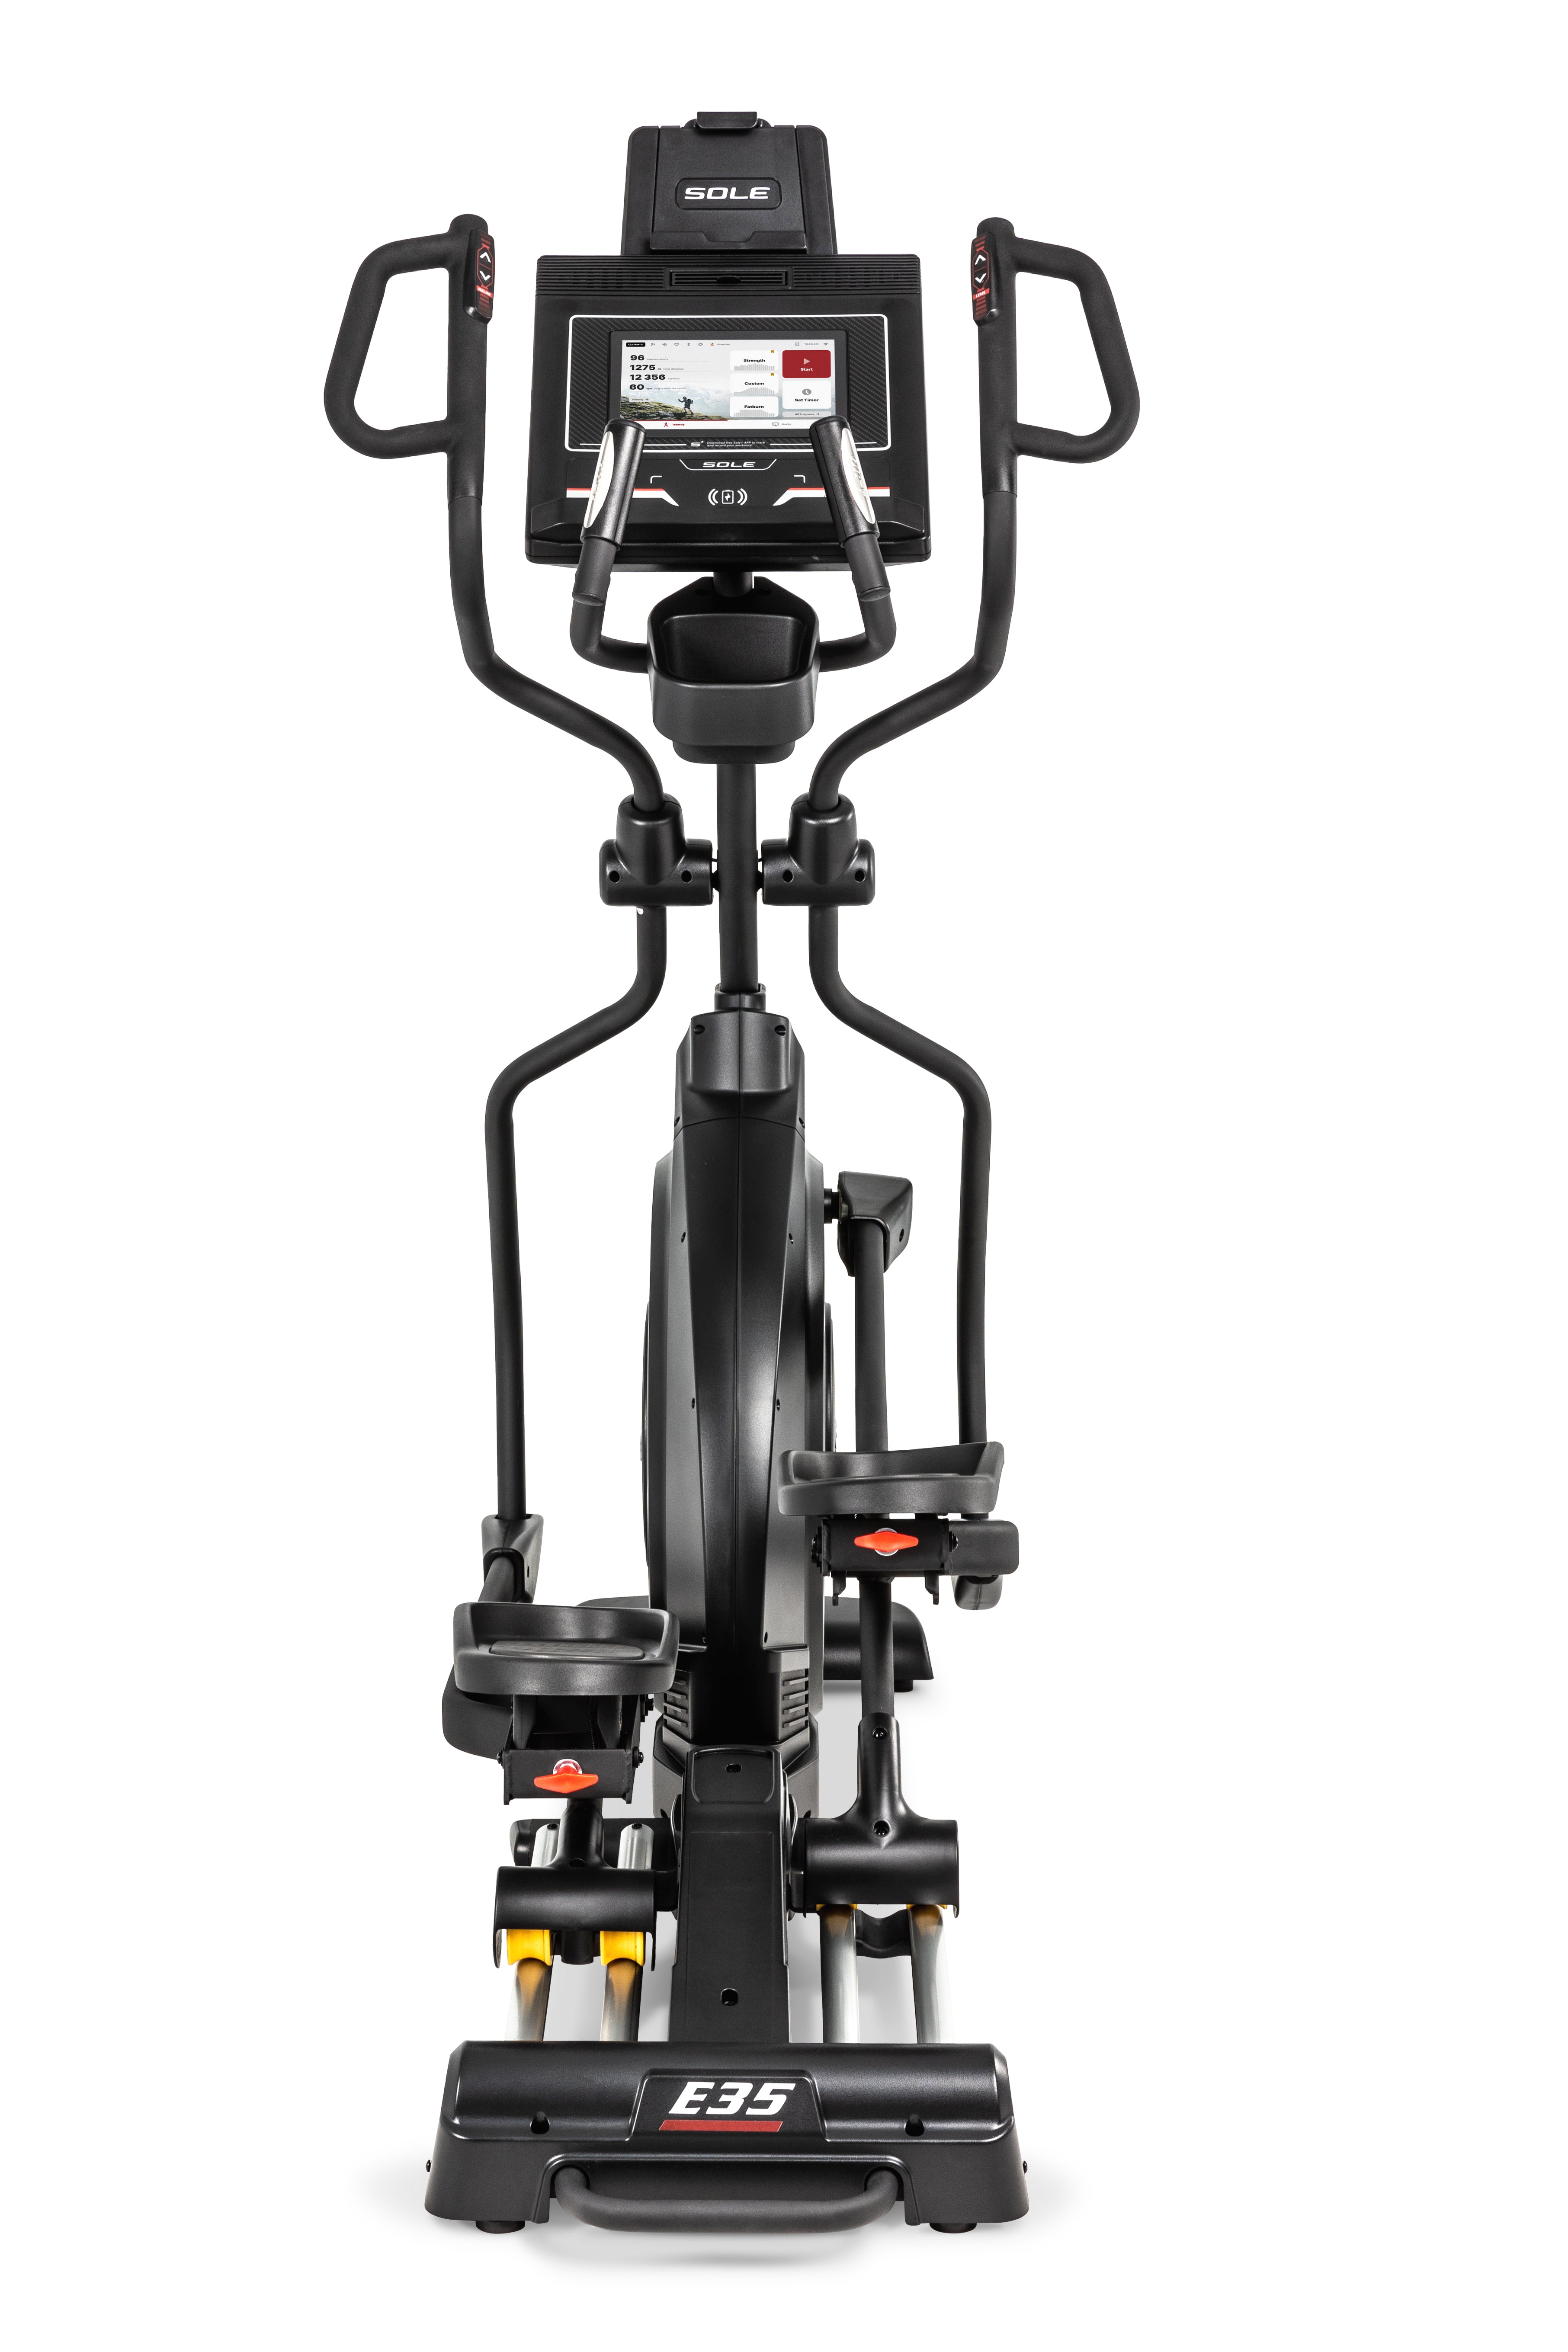 Frontal view of the Sole E35 elliptical machine, showcasing its digital touchscreen display set atop a symmetric design. The machine features ergonomic handlebars, adjustable foot pedals with labeled "E35", and safety switches. The overall color scheme is a sleek black with contrasting red and yellow adjustment components.